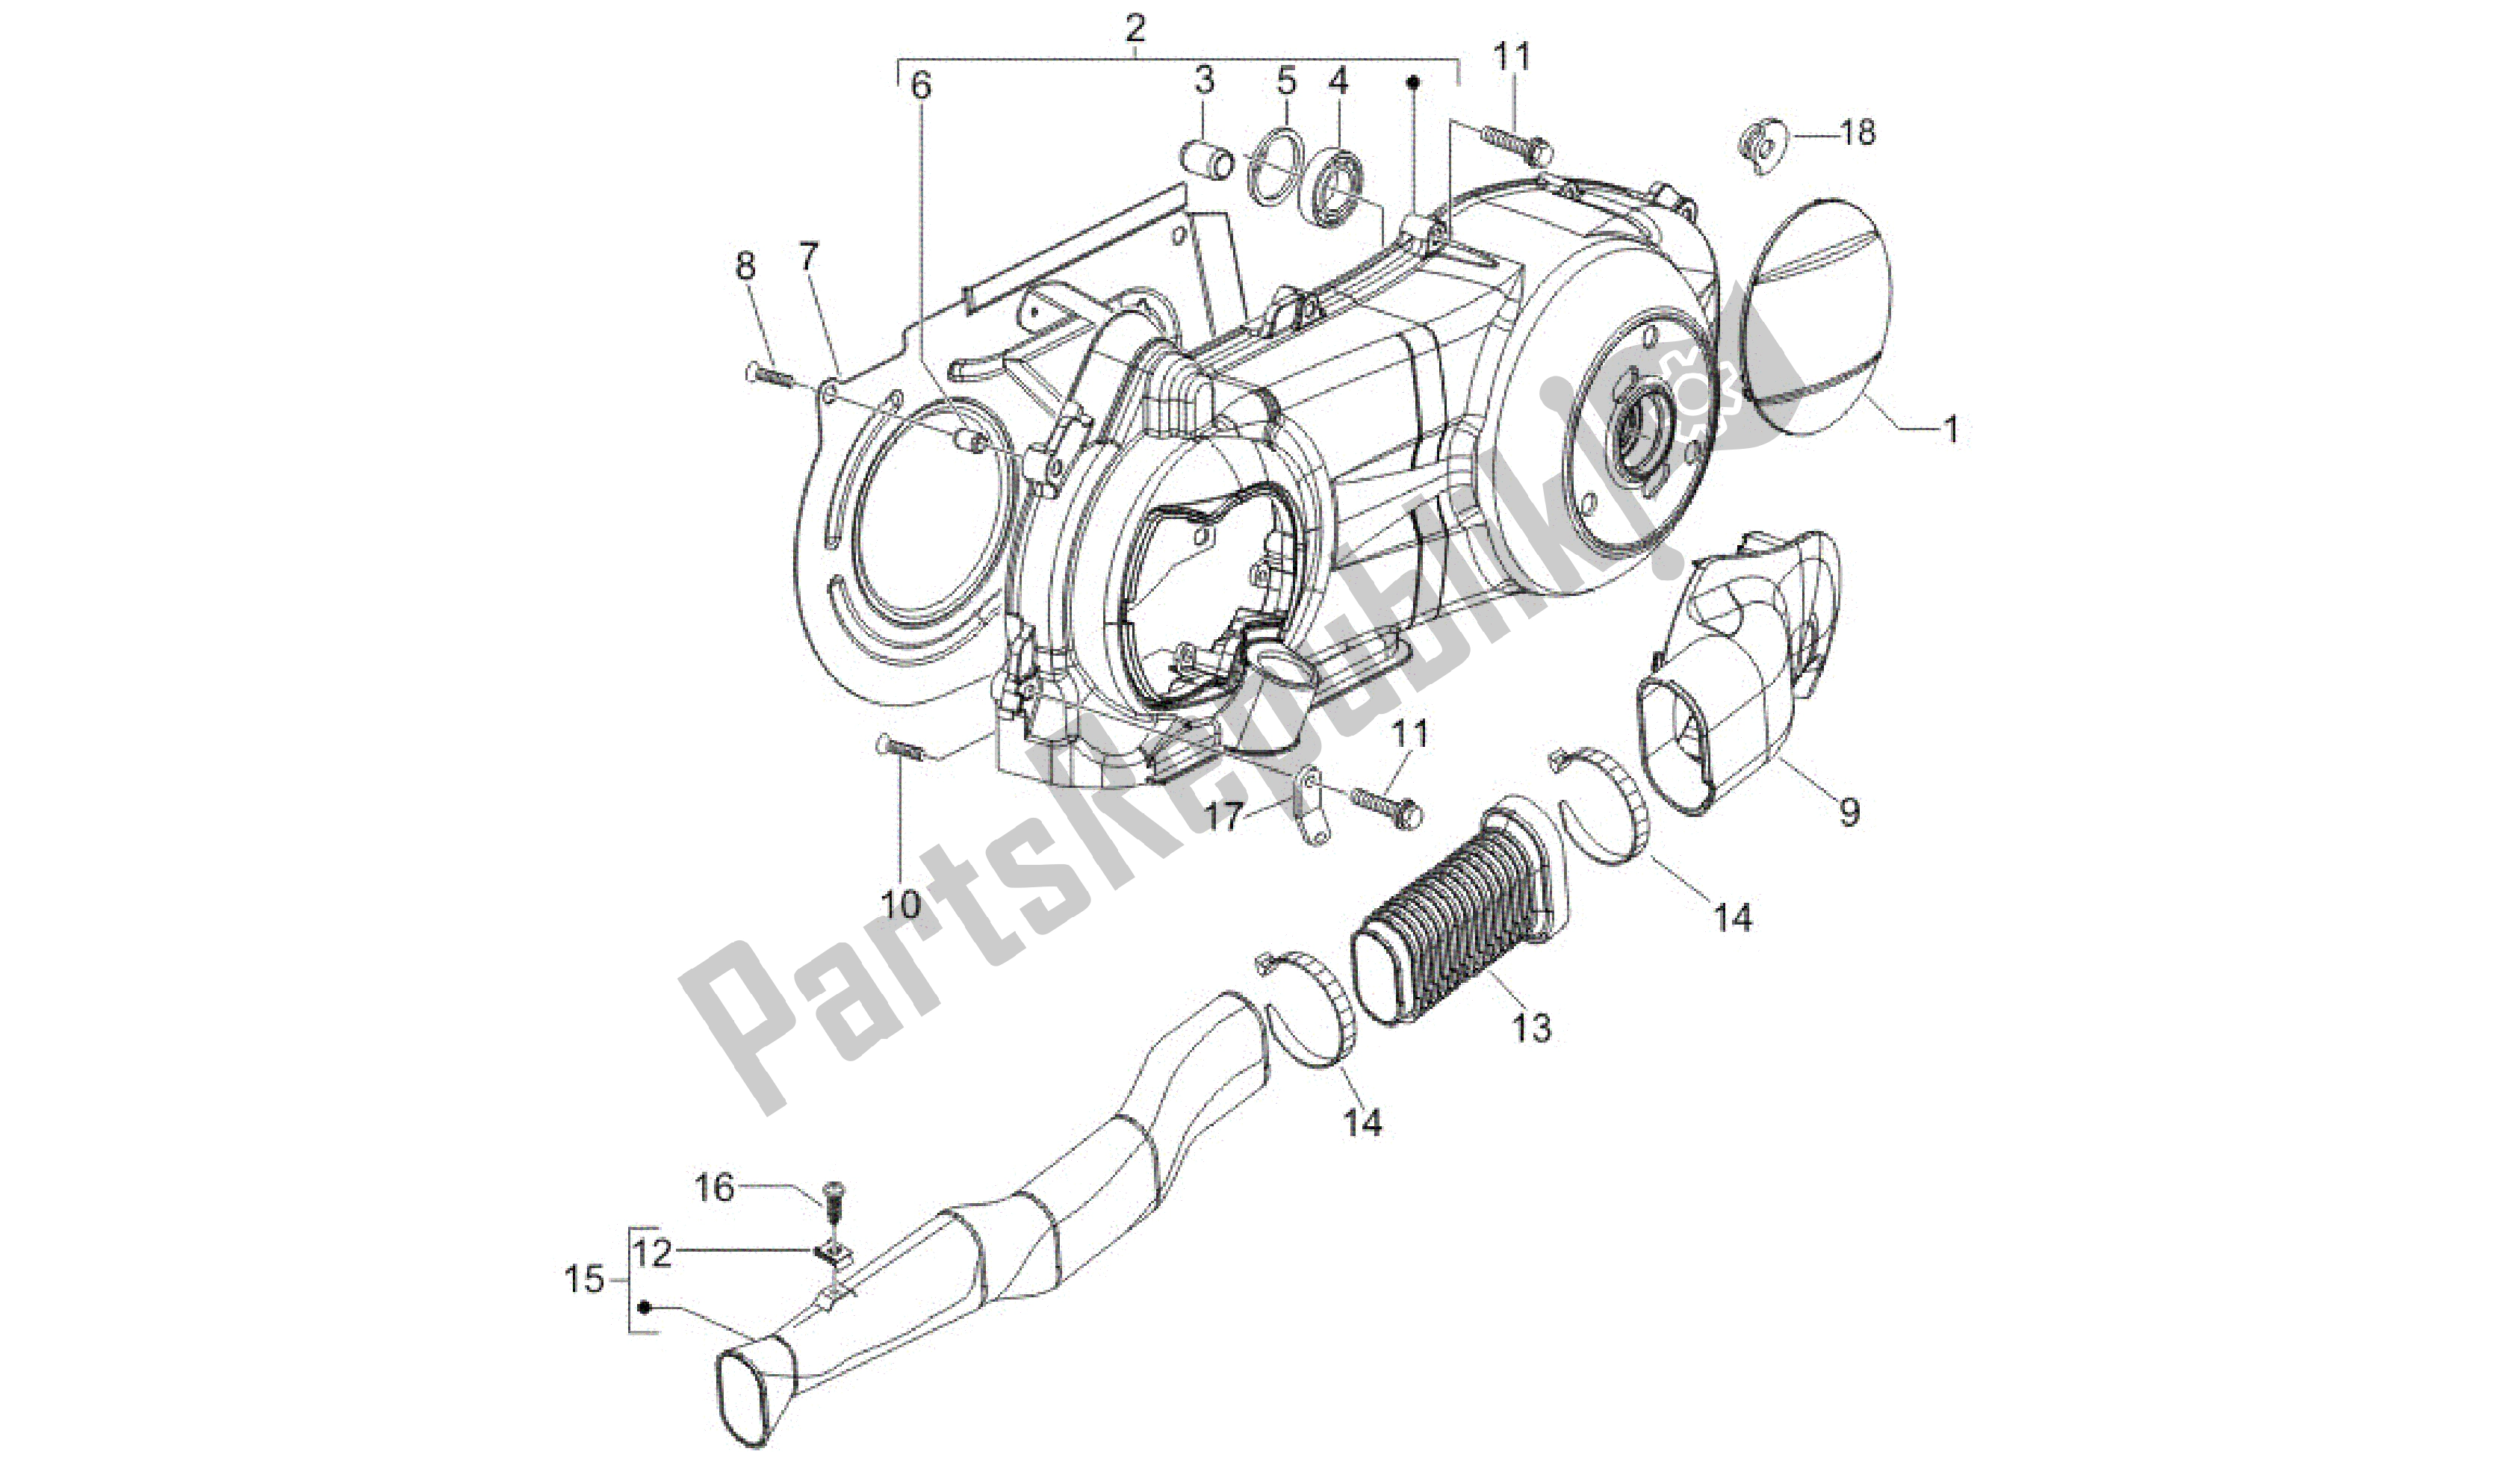 All parts for the Crankcase Cover - Crankcase Cooling of the Gilera Runner 200 2005 - 2011